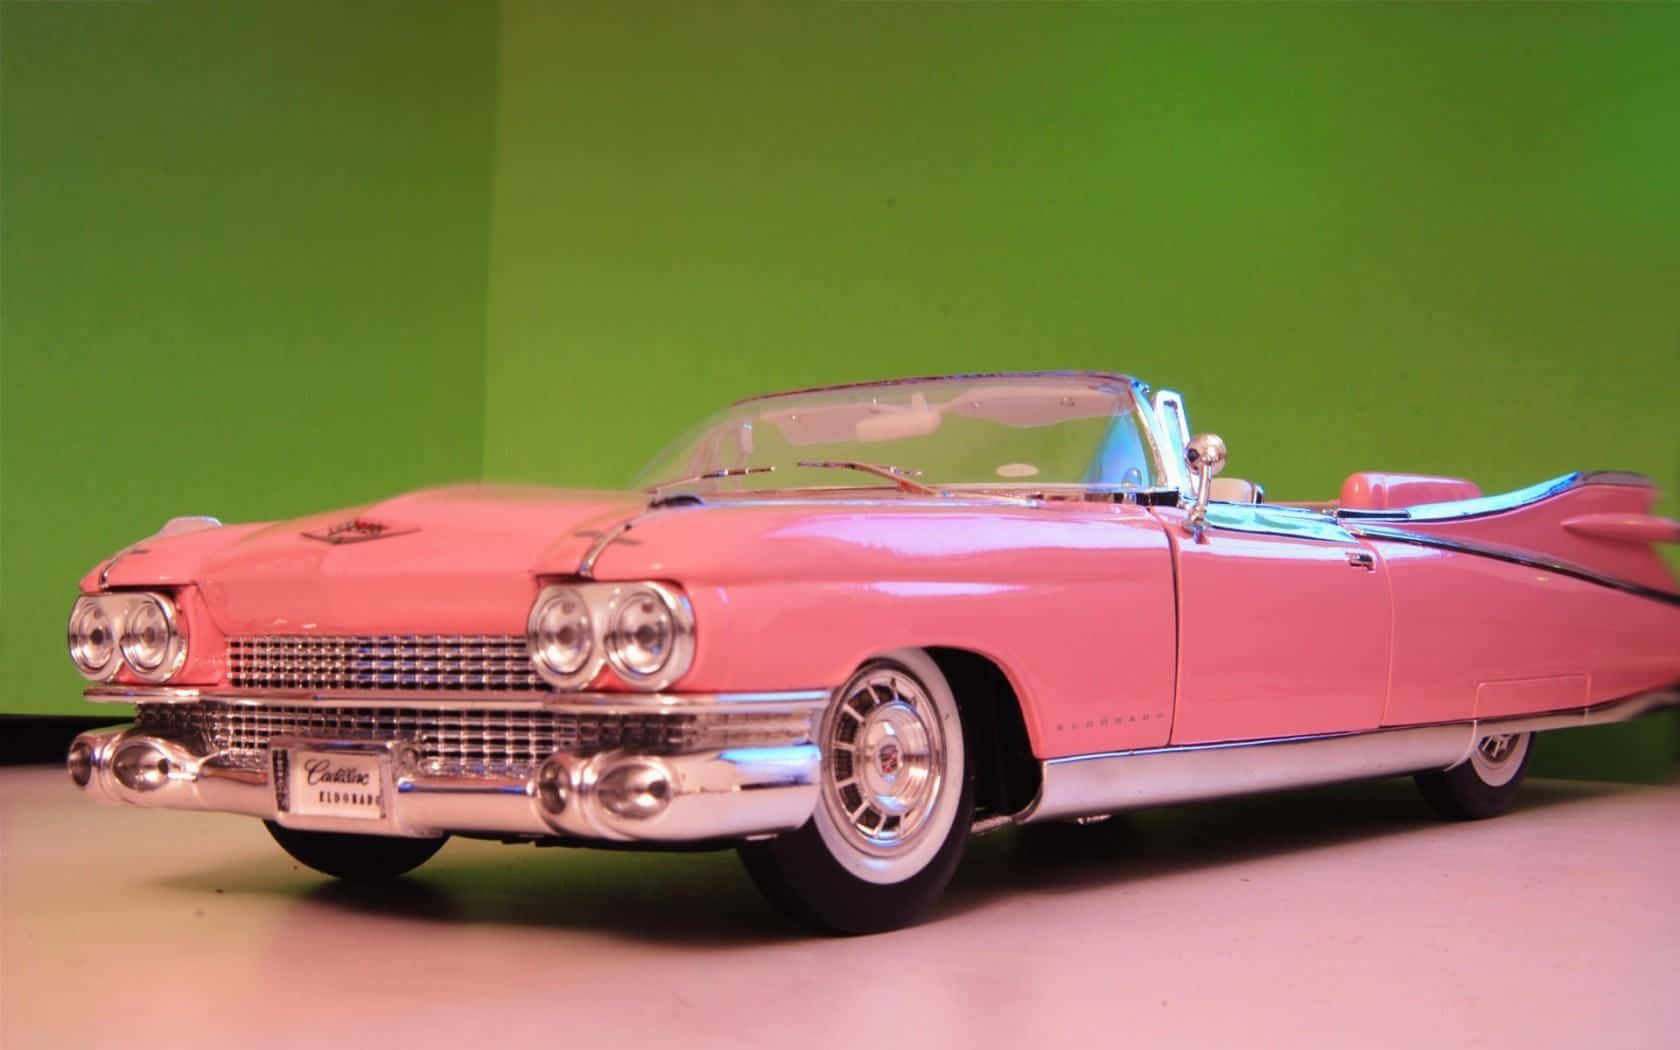 A Pink Cadillac Convertible Is On Display Wallpaper